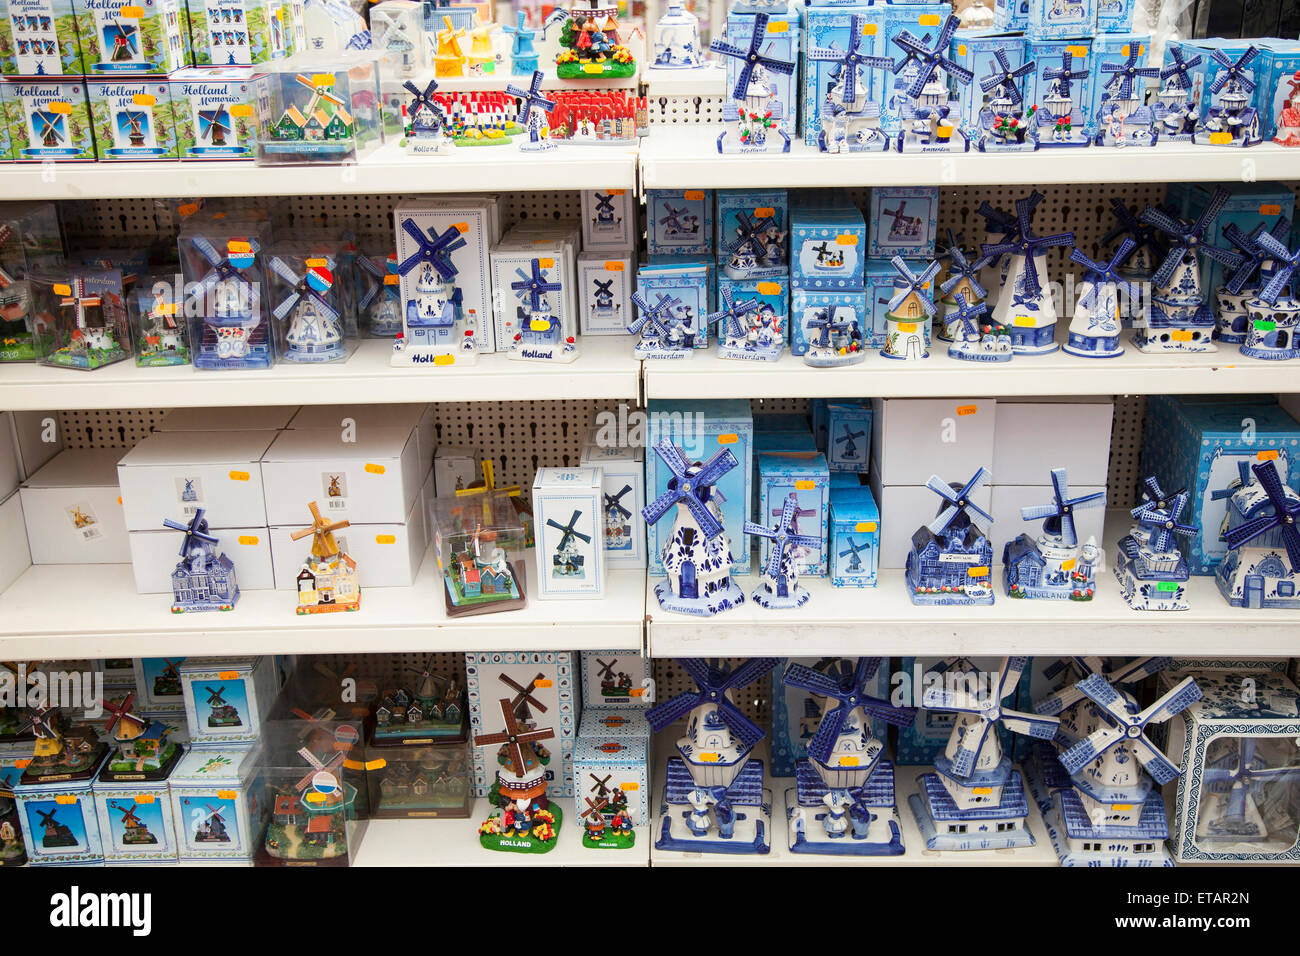 delft blue windmills and other souvenirs on shelves in amsterdam shop Stock Photo